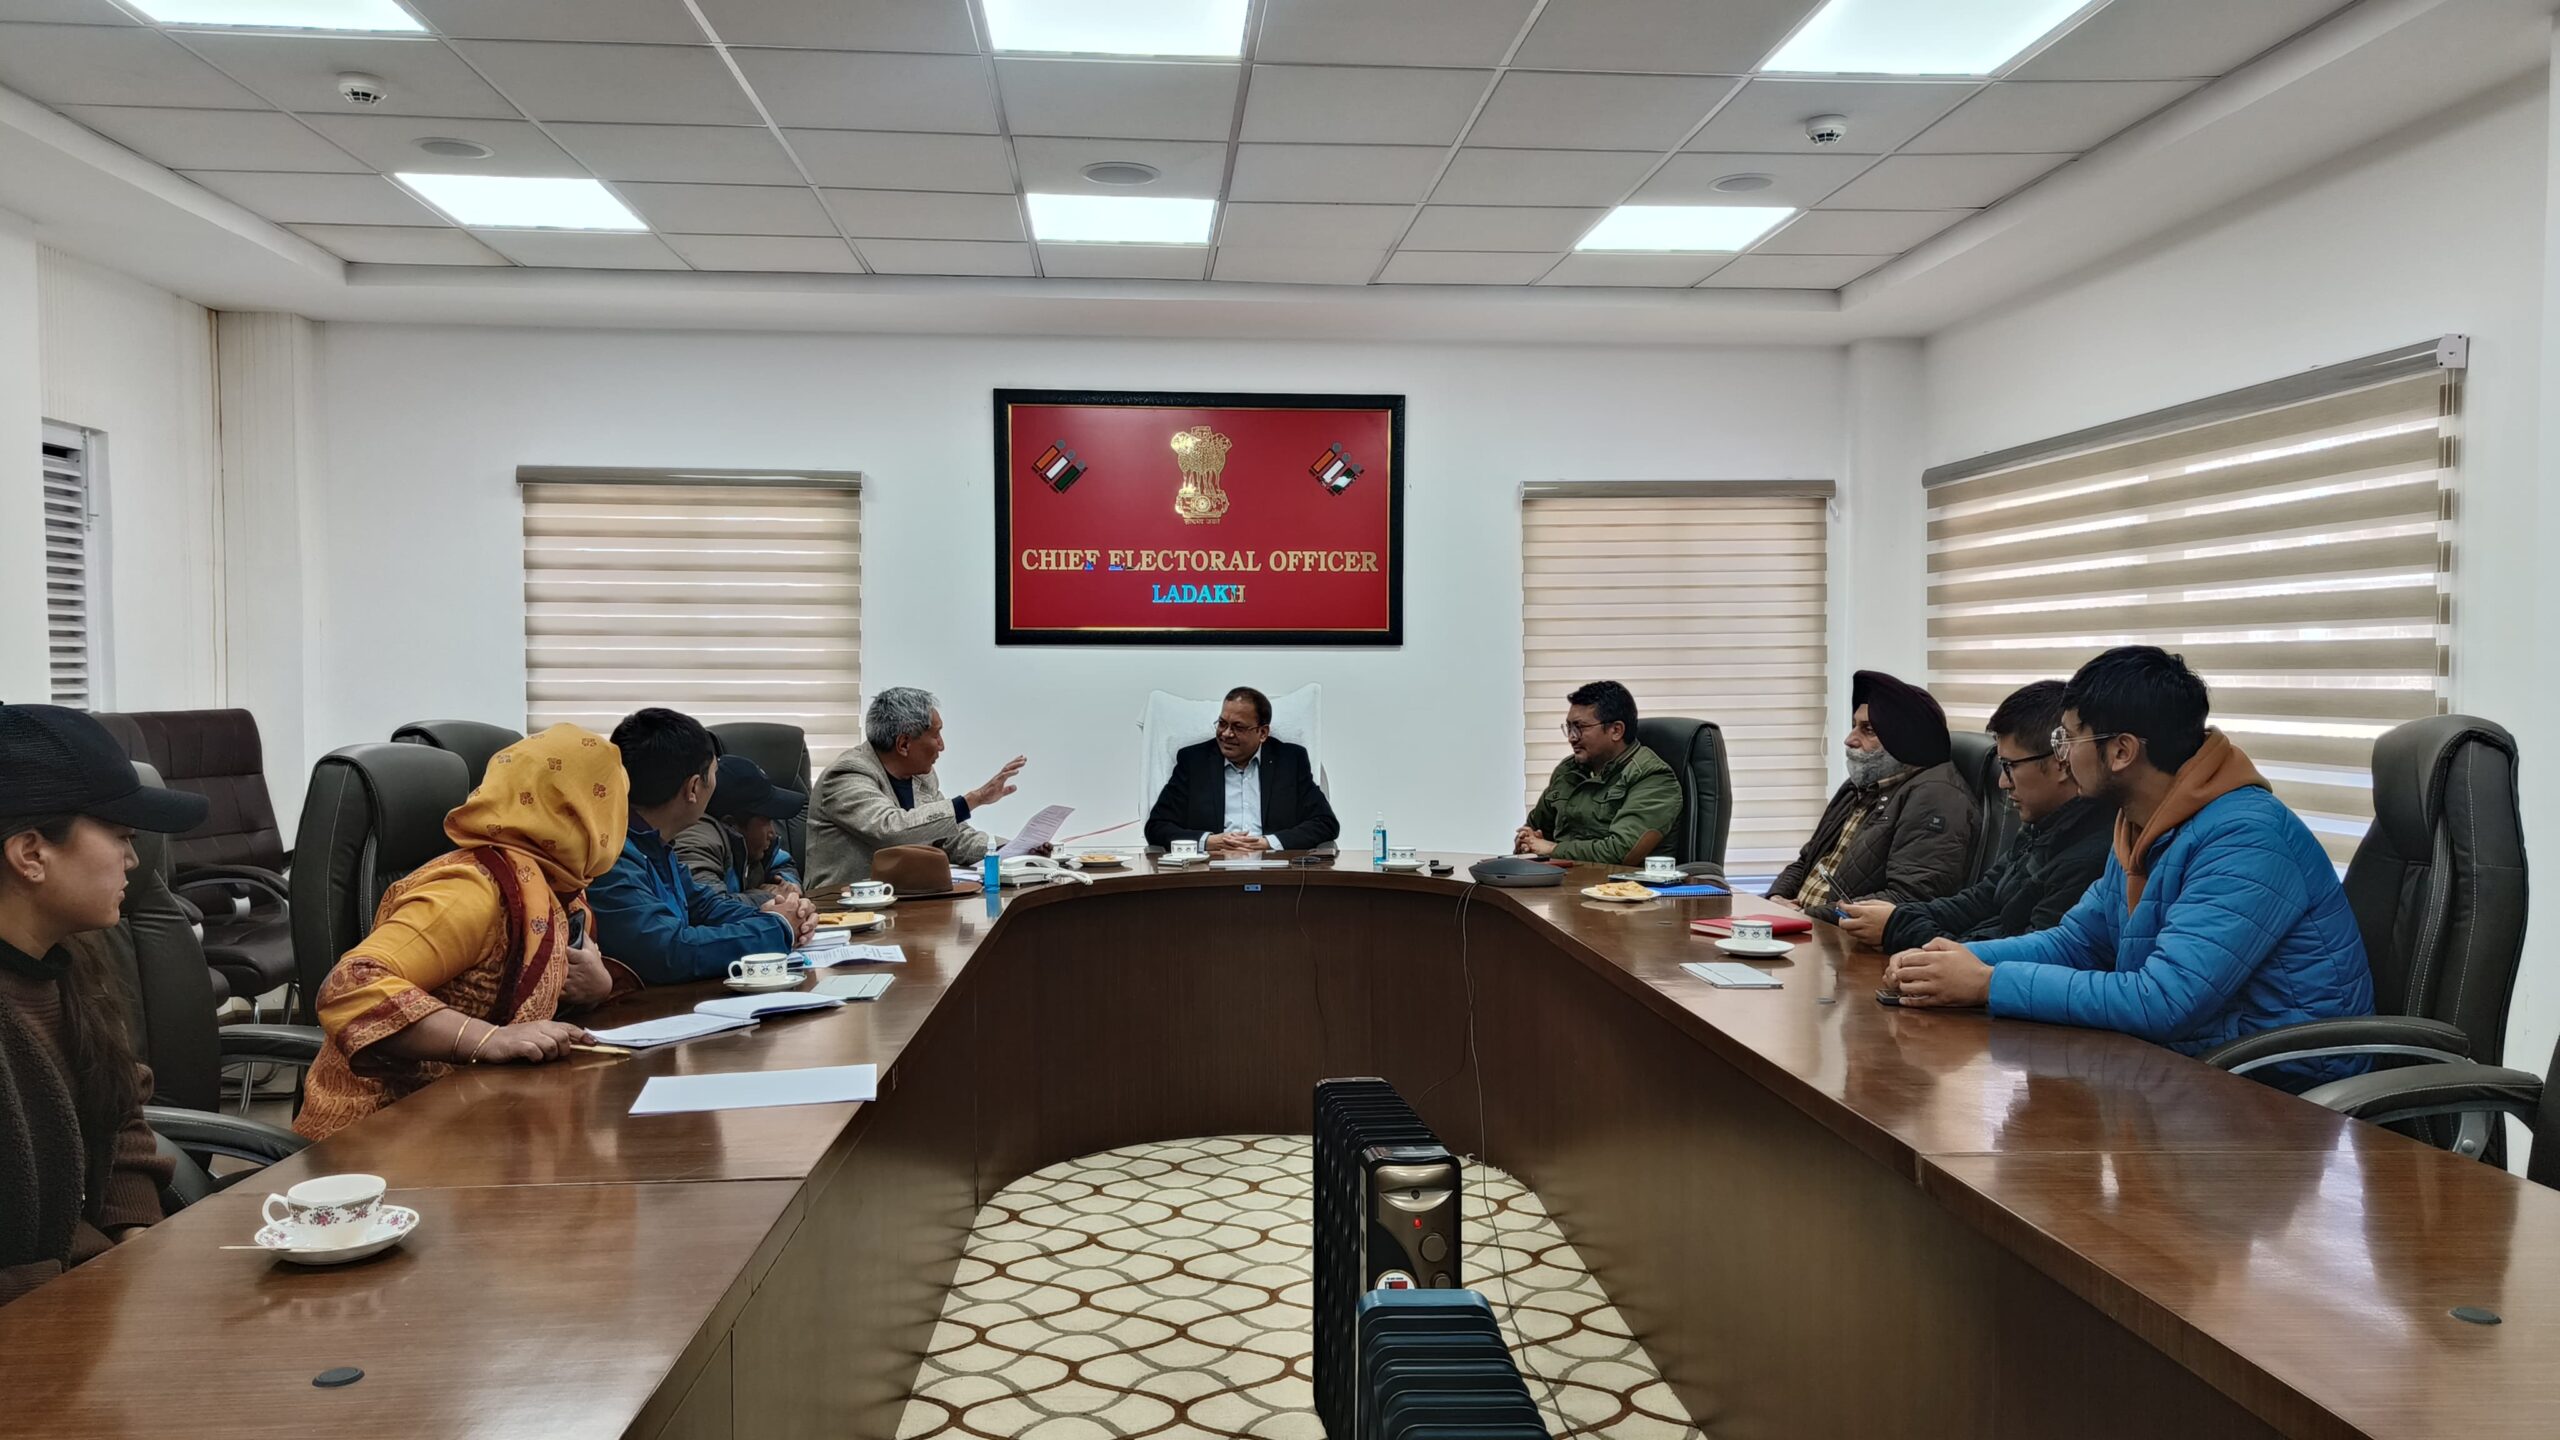 Chief Electoral Officer, Ladakh chairs meeting with State SVEEP Icon and District SVEEP Icons